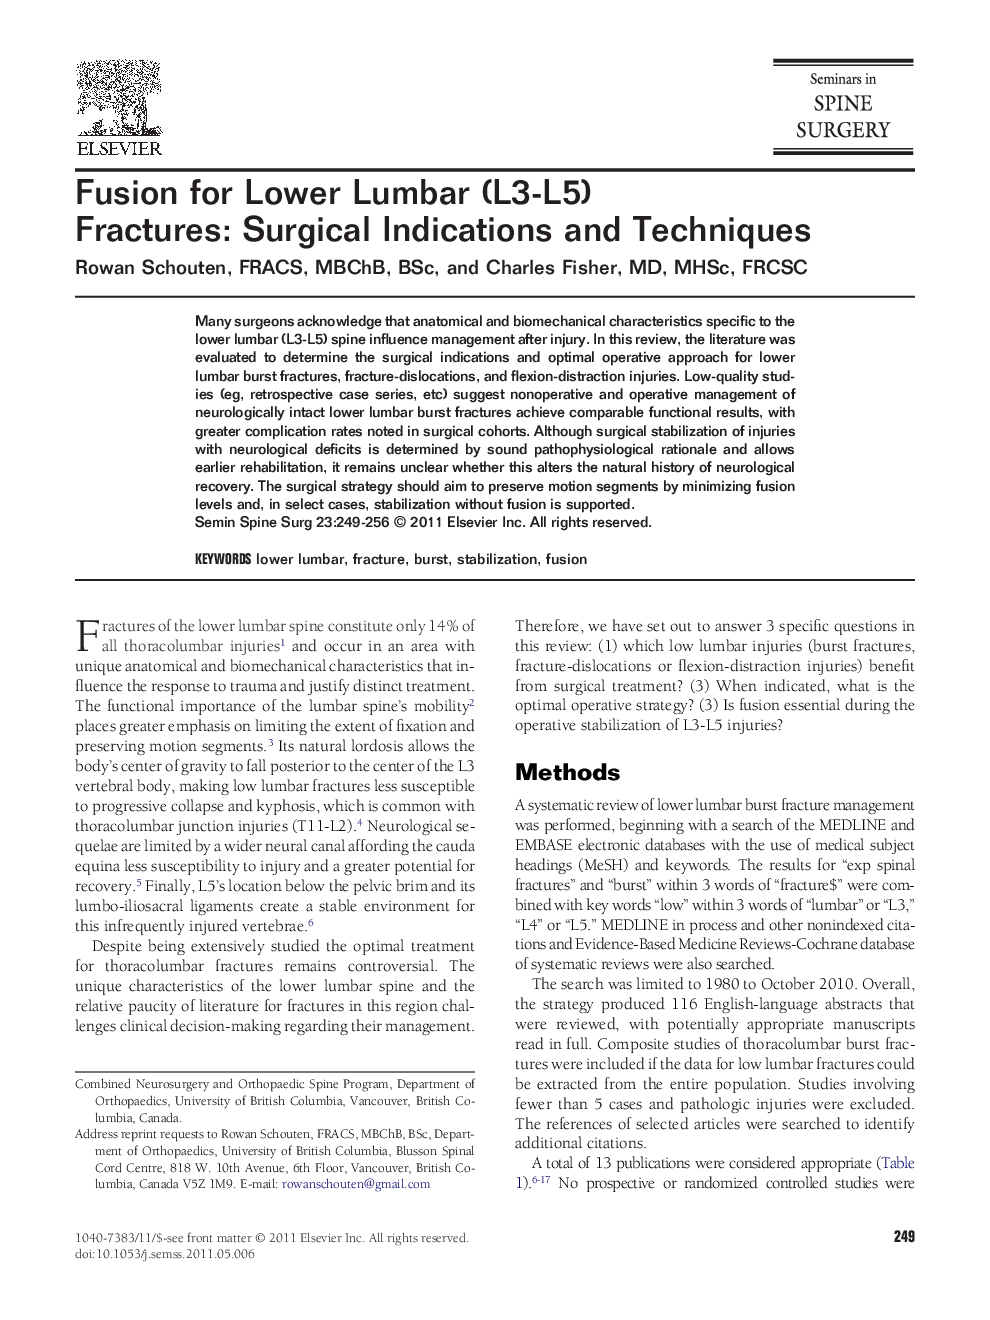 Fusion for Lower Lumbar (L3-L5) Fractures: Surgical Indications and Techniques